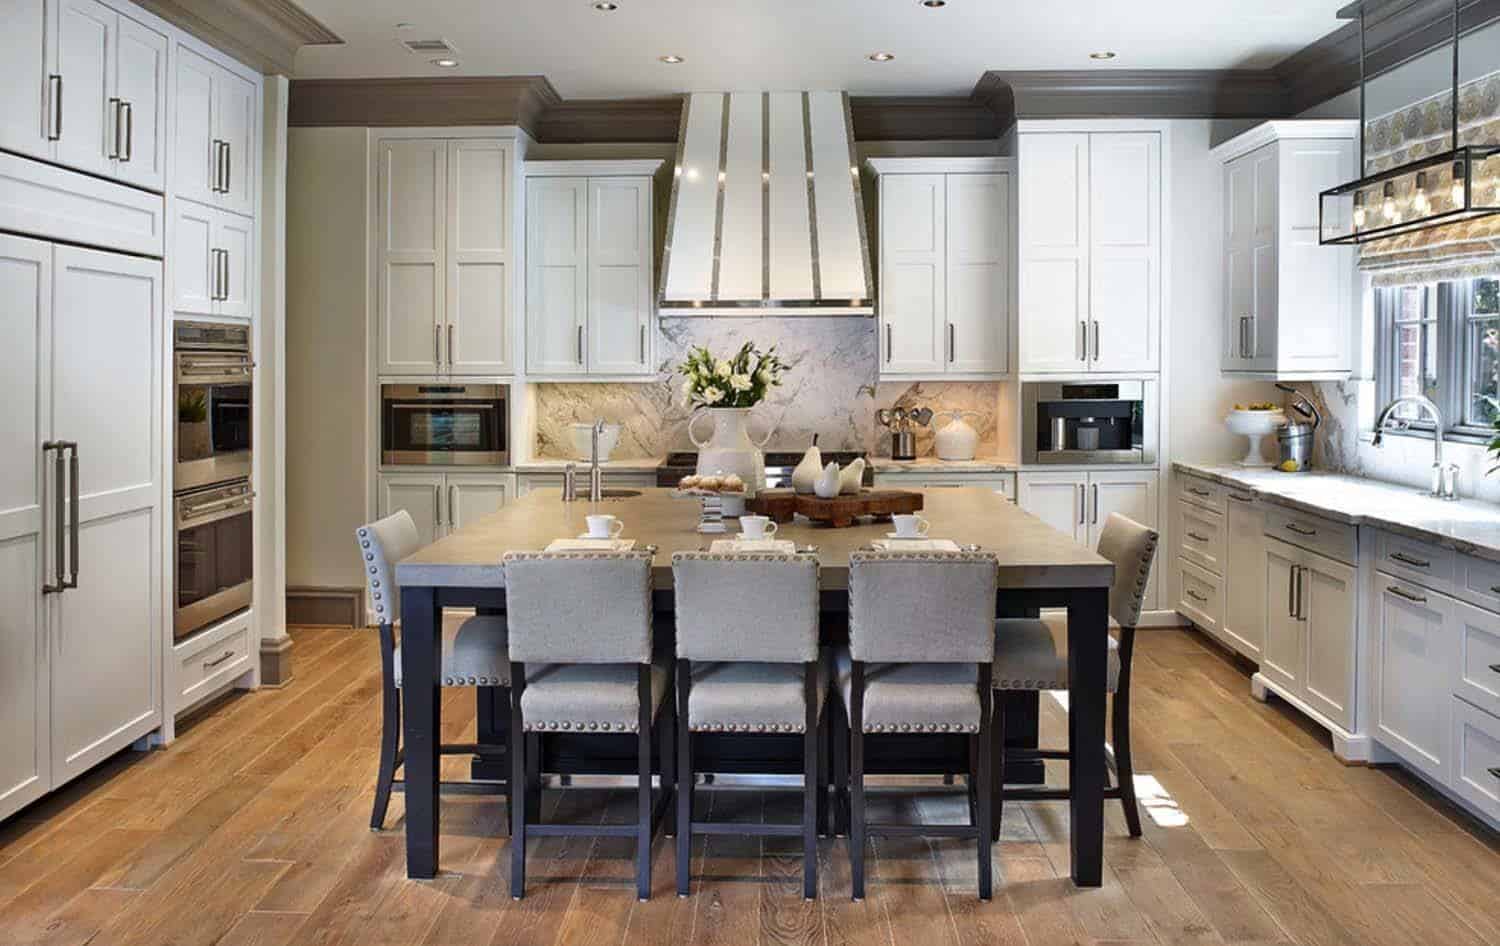 island kitchen seating table dimensions dining townhome islands shaped designs chairs functional space modern seats breakfast house layout inspiration area